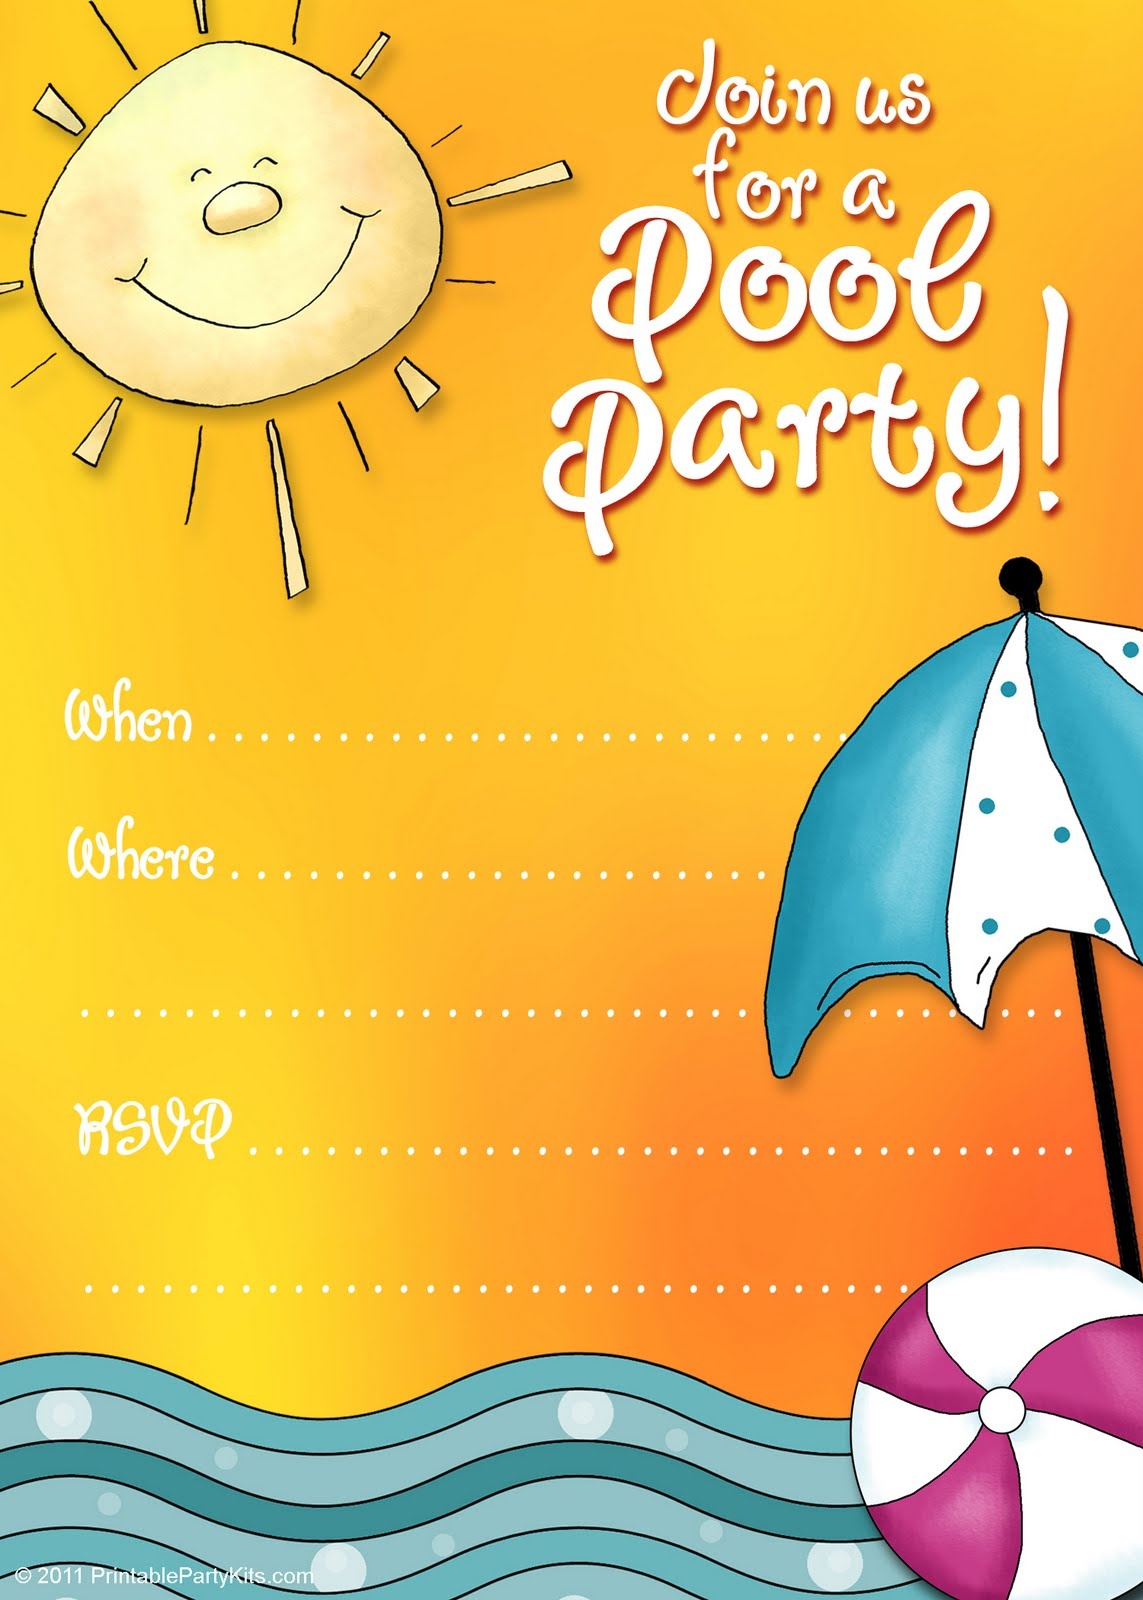 45 Pool Party Invitations | Kittybabylove - Free Printable Pool Party Invitations